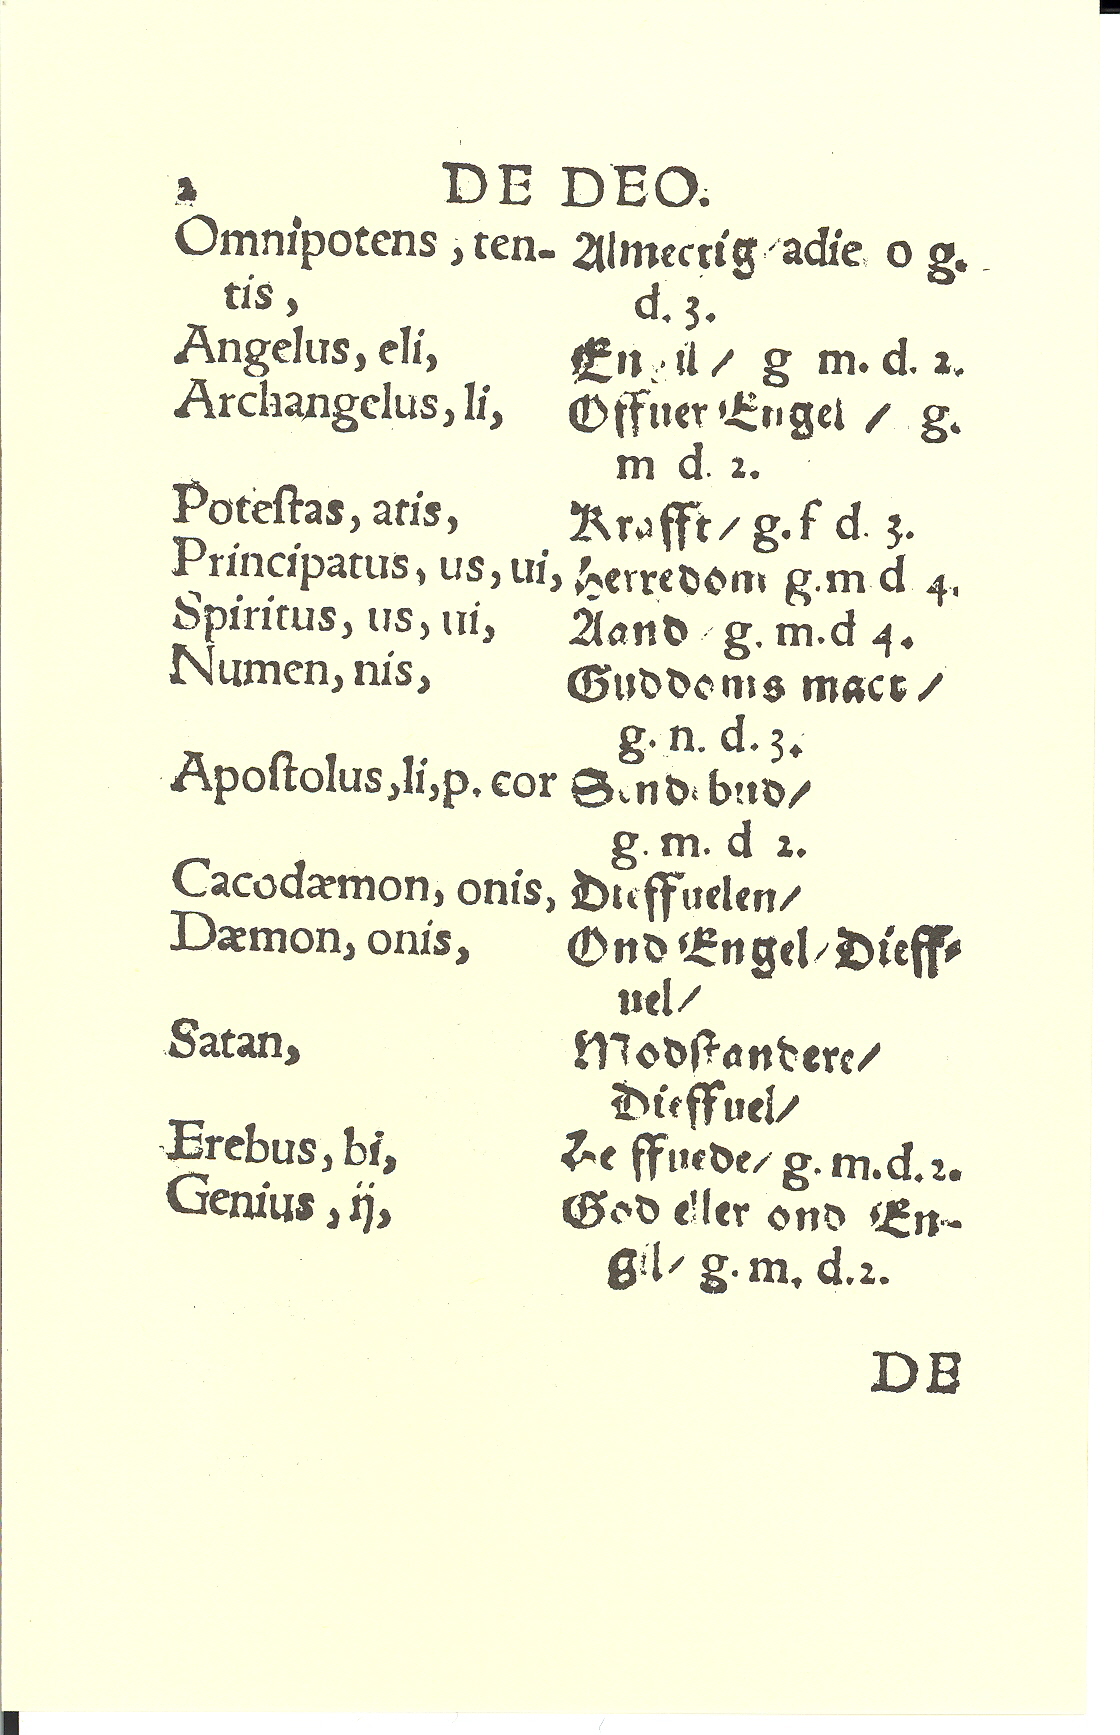 Smith 1563, Side: 2